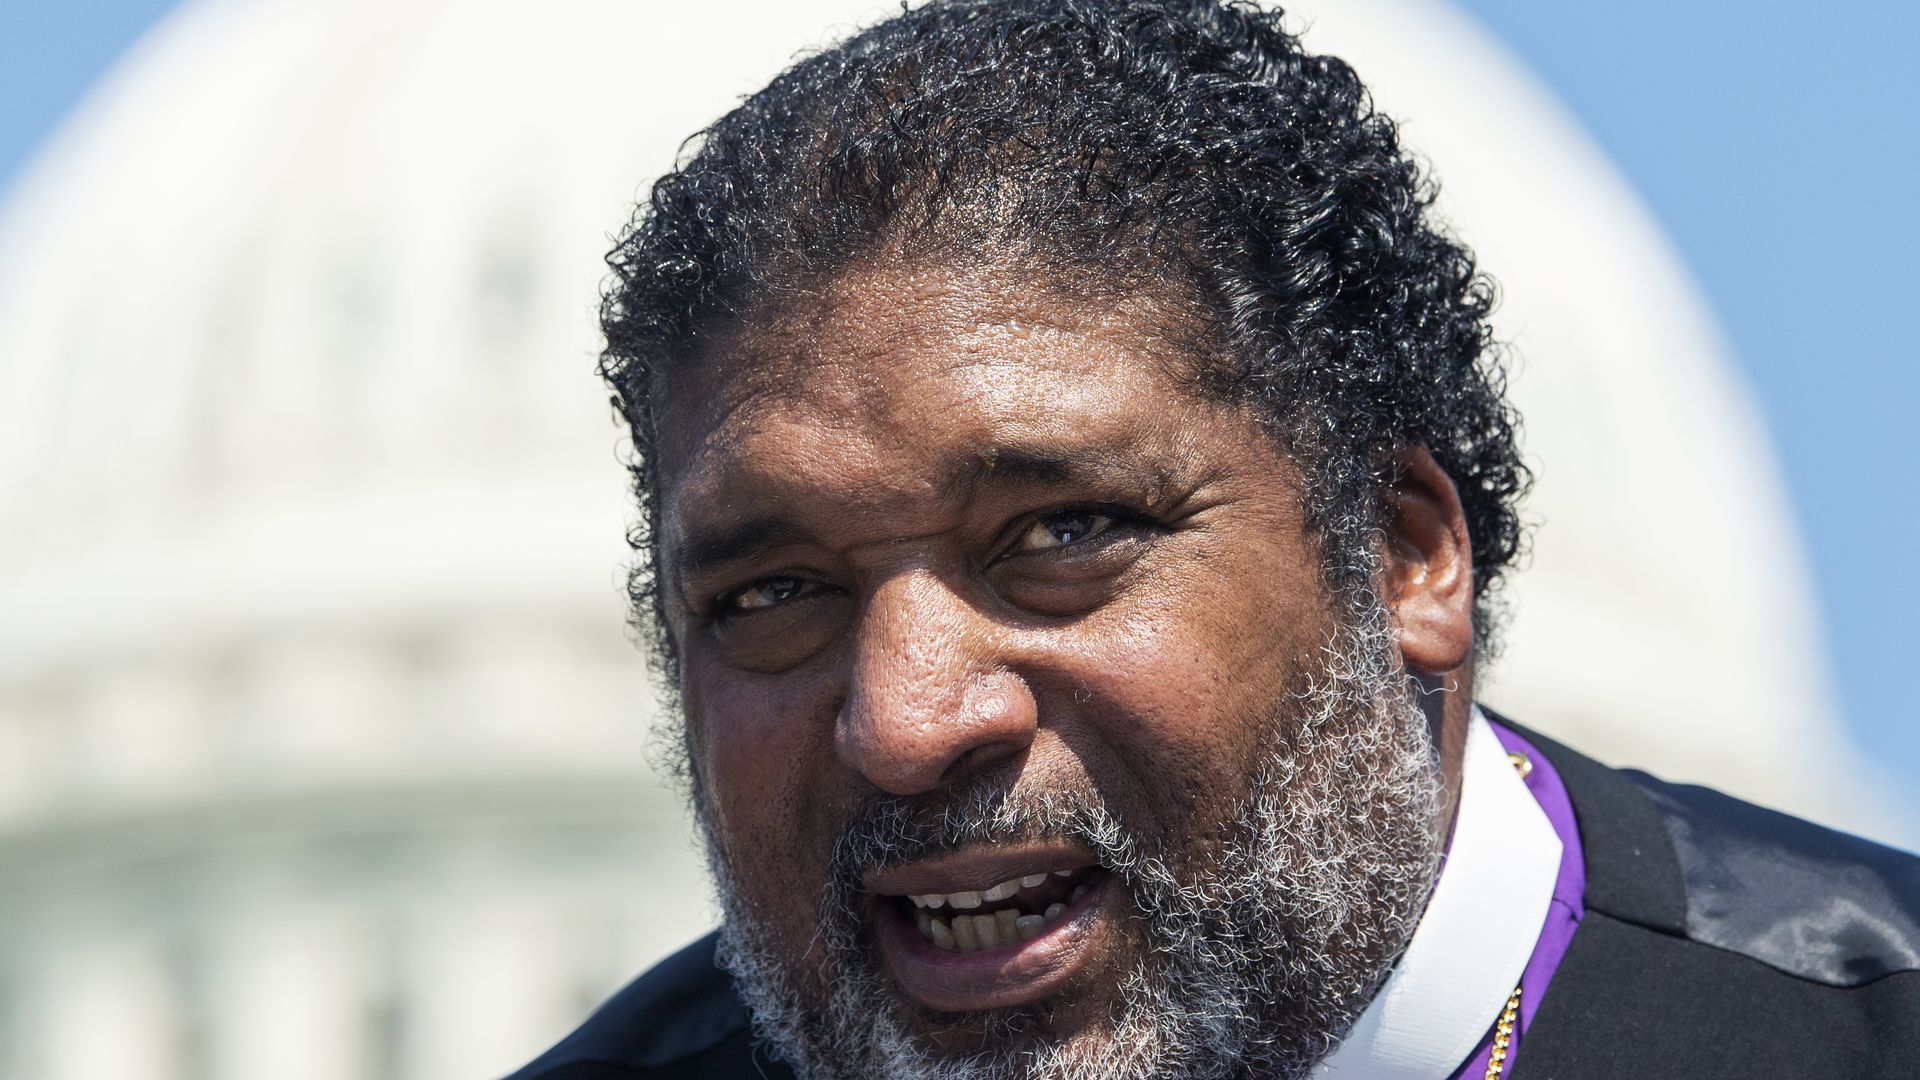 Rev. Dr. William Barber conducts a news conference on voting rights and infrastructure outside the U.S. Capitol.